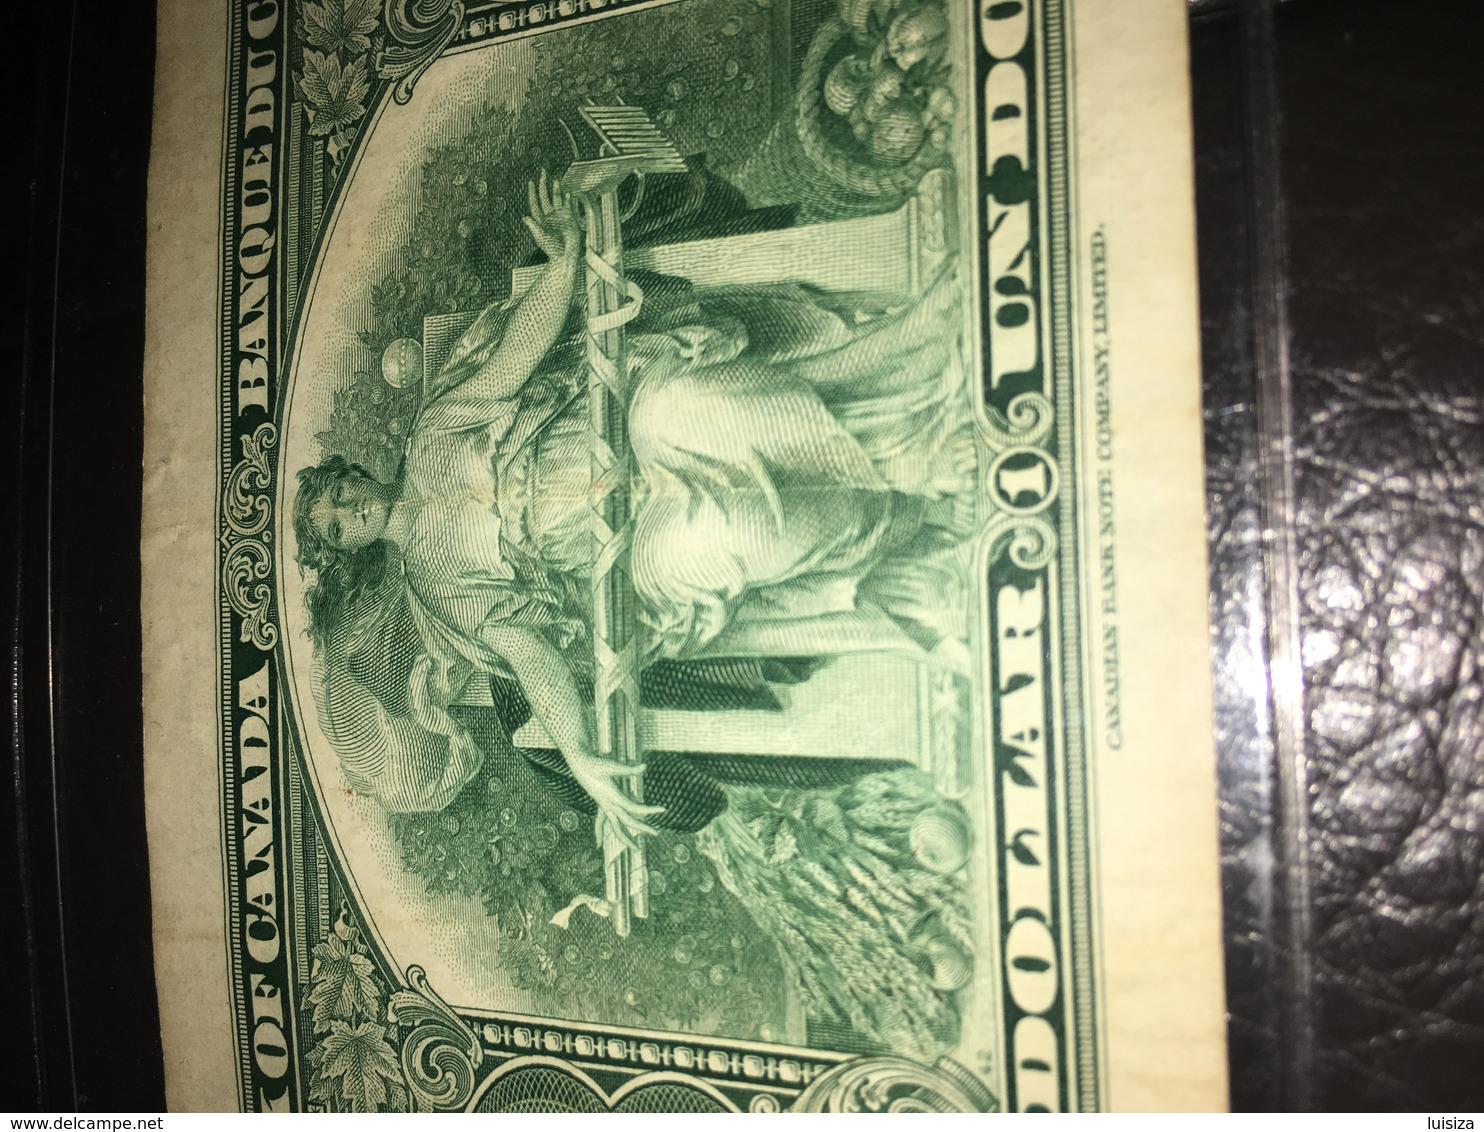 See Photos. Canada 1 Dollar 1937 Banknote Currency Money. Circulated in good condition.